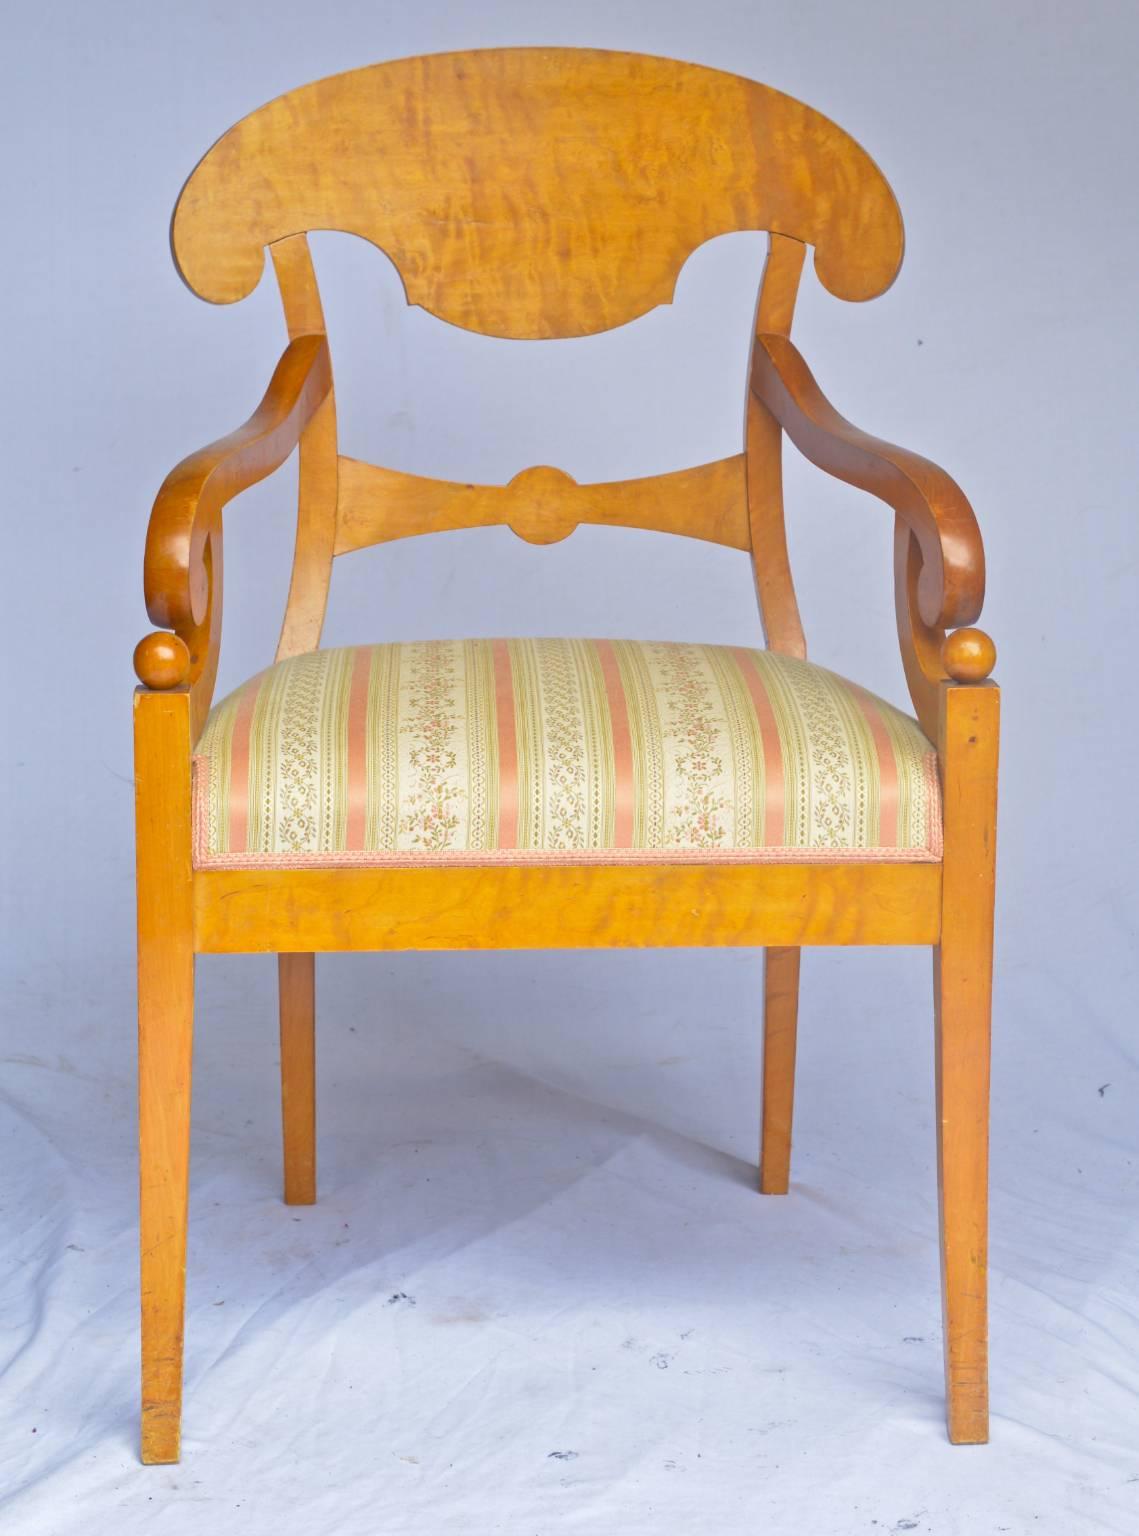 Antique Swedish Biedermeier Empire pair of carver chairs in highly quilted golden birch veneers finished in the Classic honey colour French polish finish.

They have fully webbed seats for maximum comfort and the gently curved front legs are topped